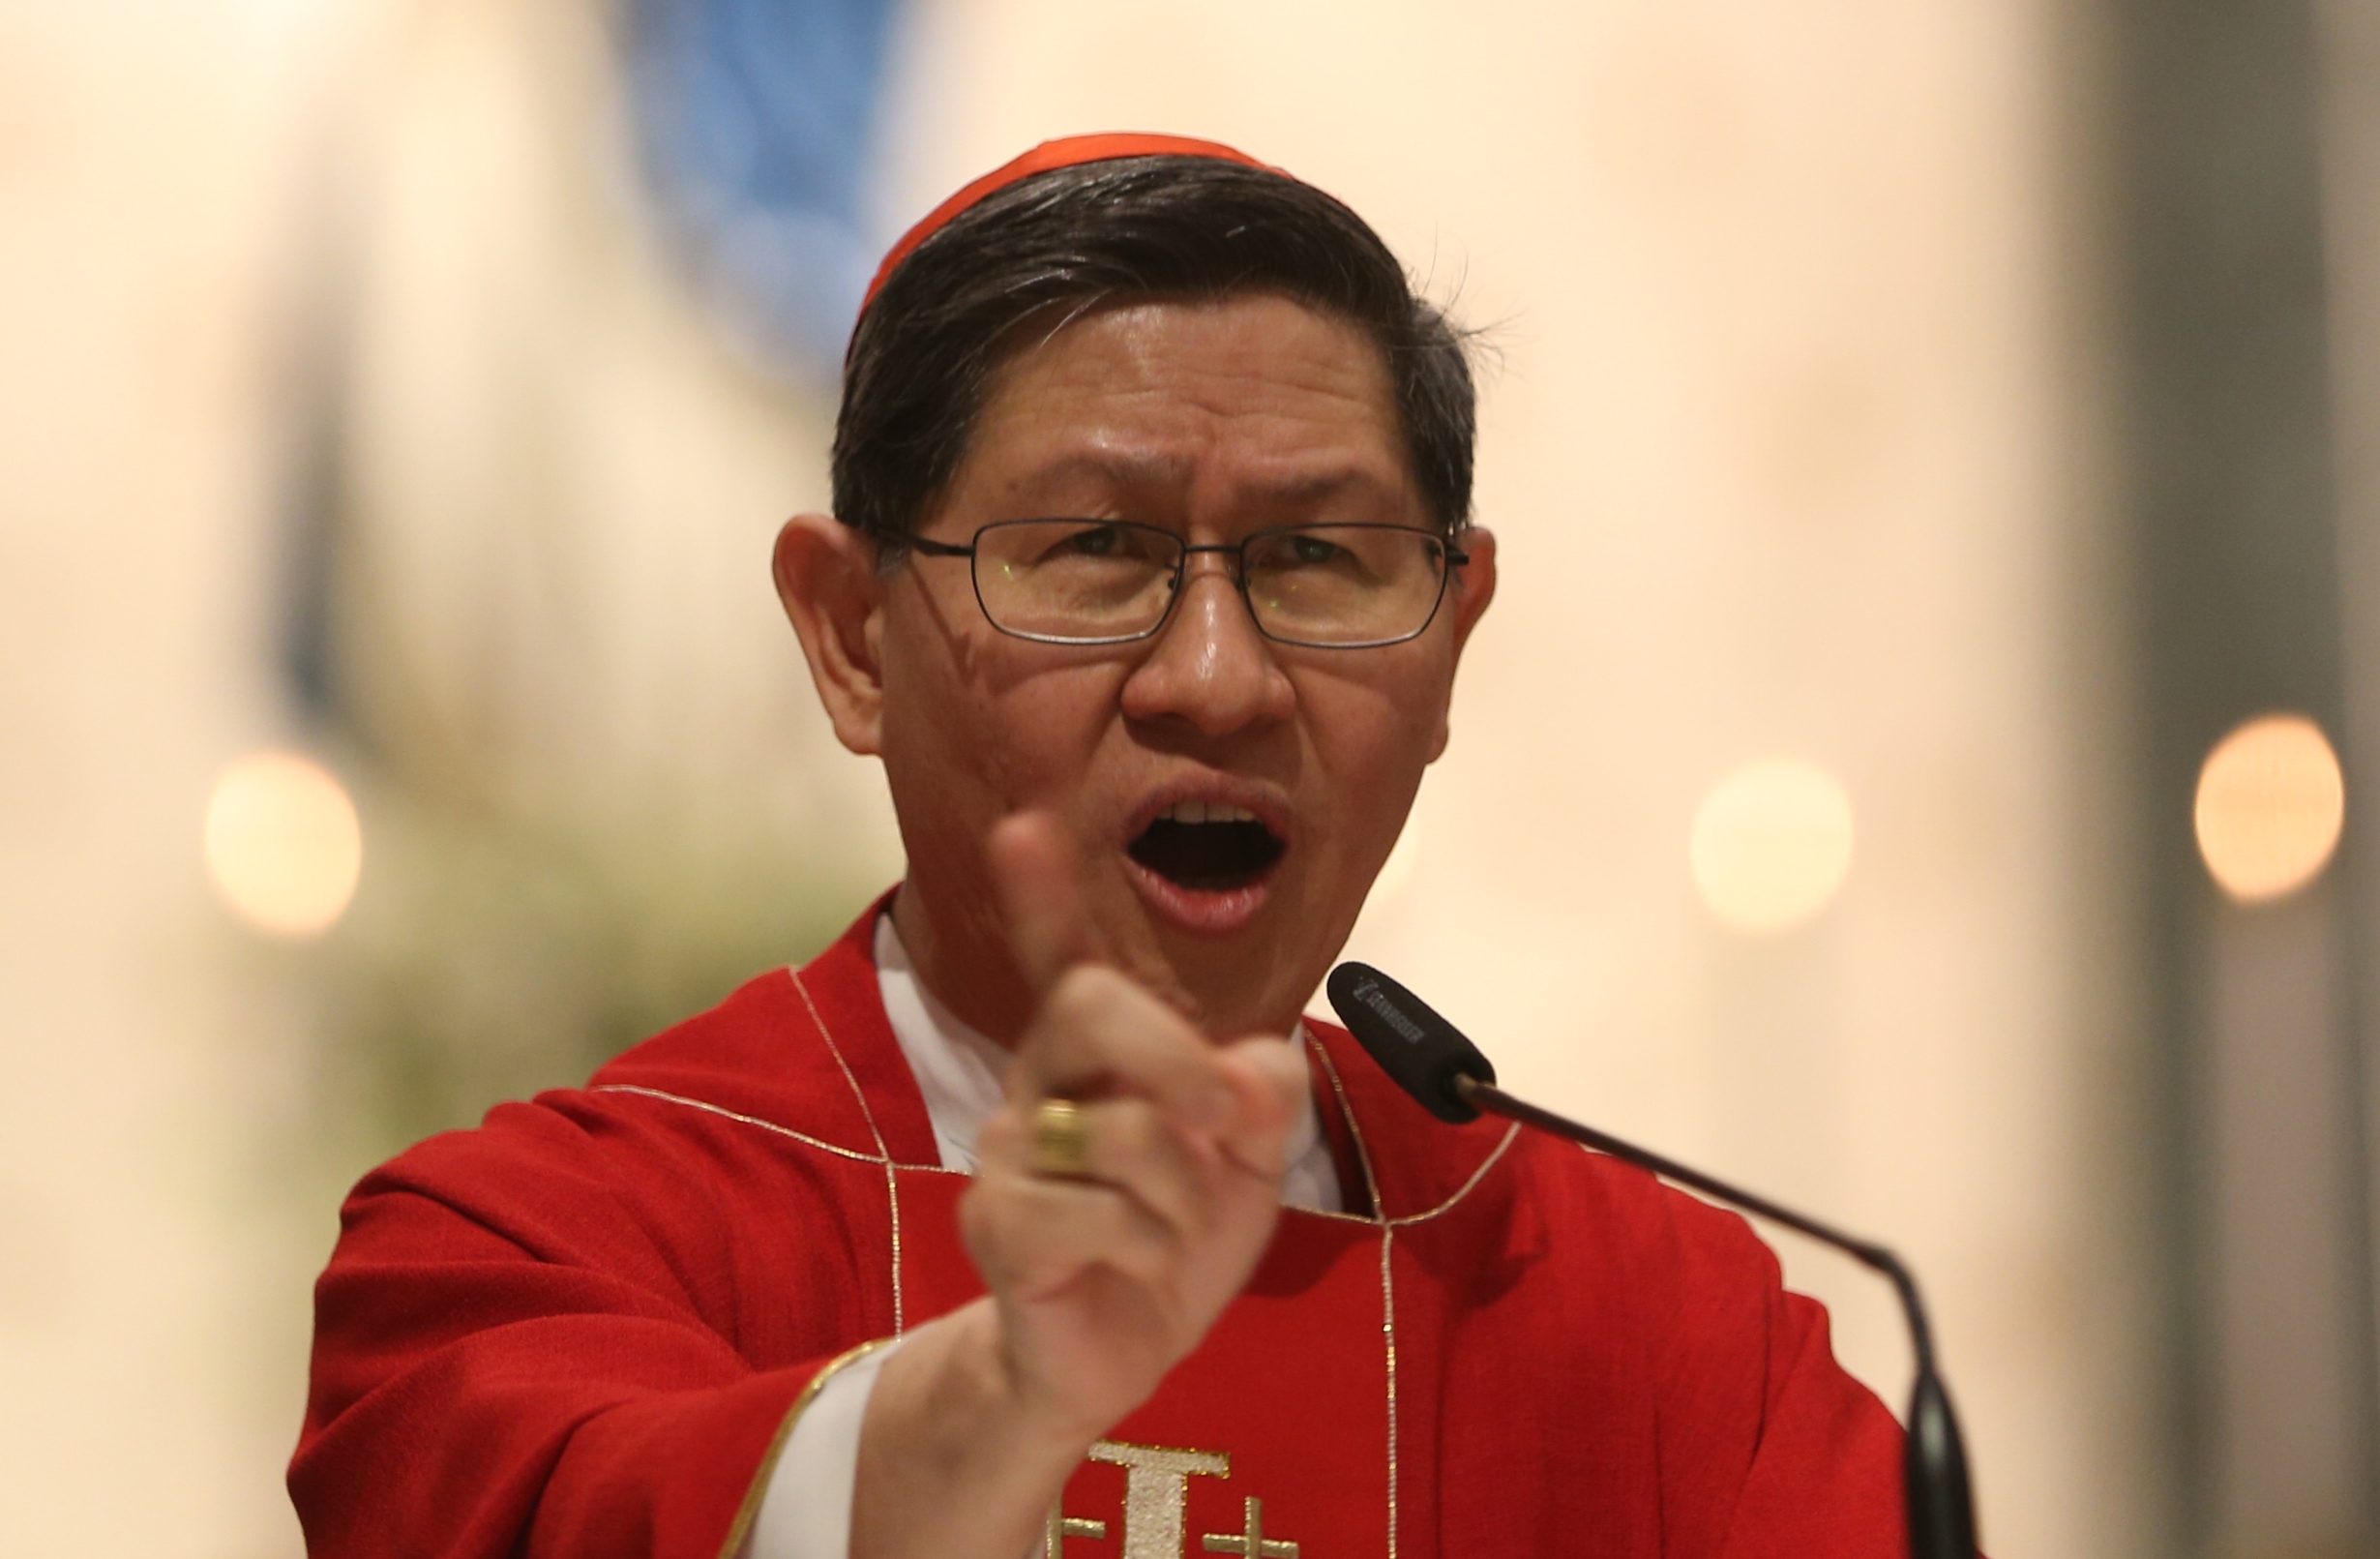 Tagle to Jolo cathedral bombers: Ask forgiveness from God, humanity